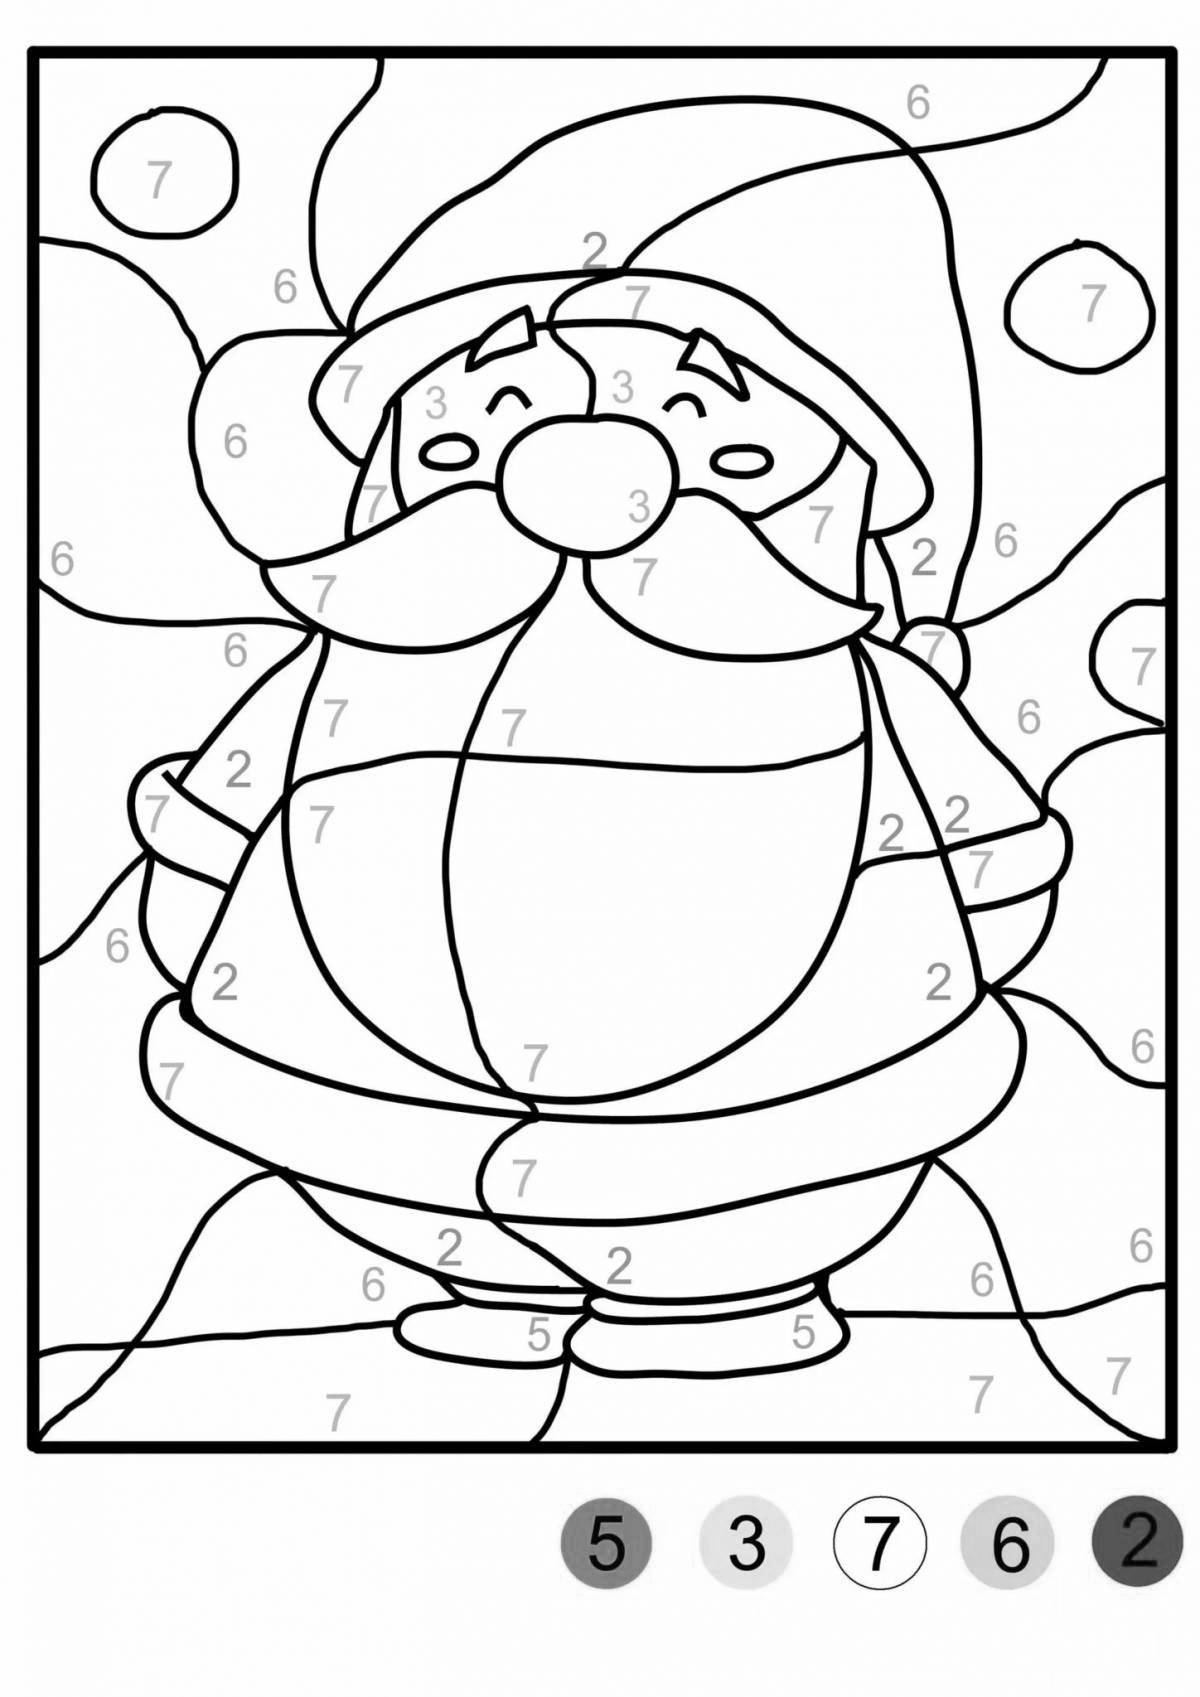 Coloring book beckoning new year in numbers